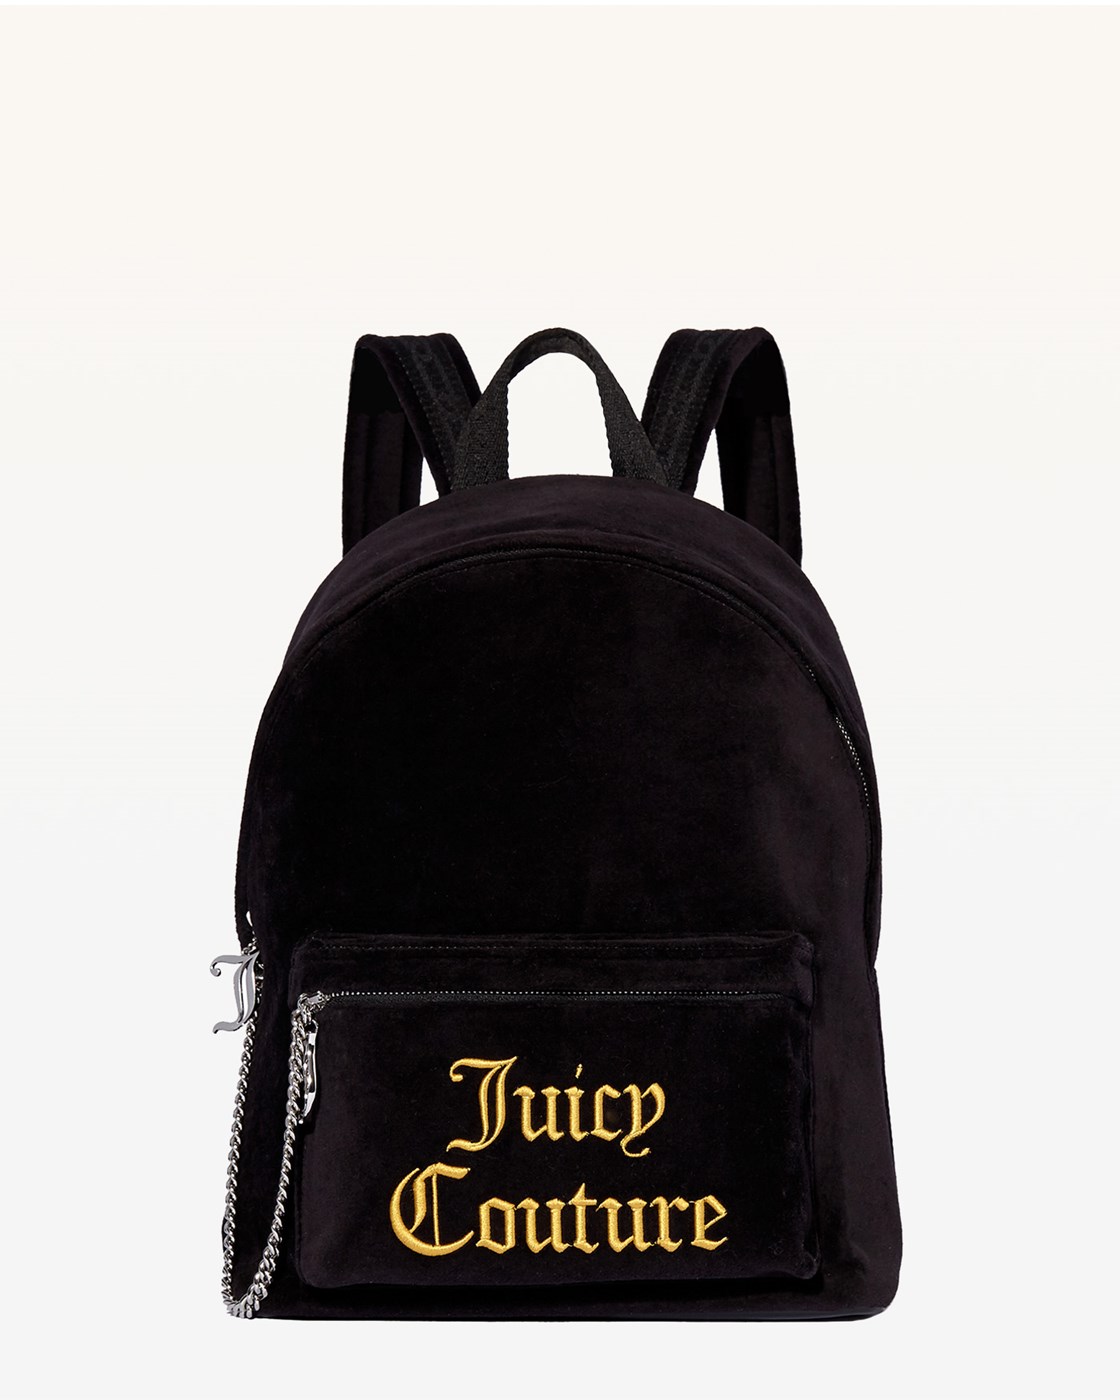 Juicy Couture Embroidered  Delta Backpack